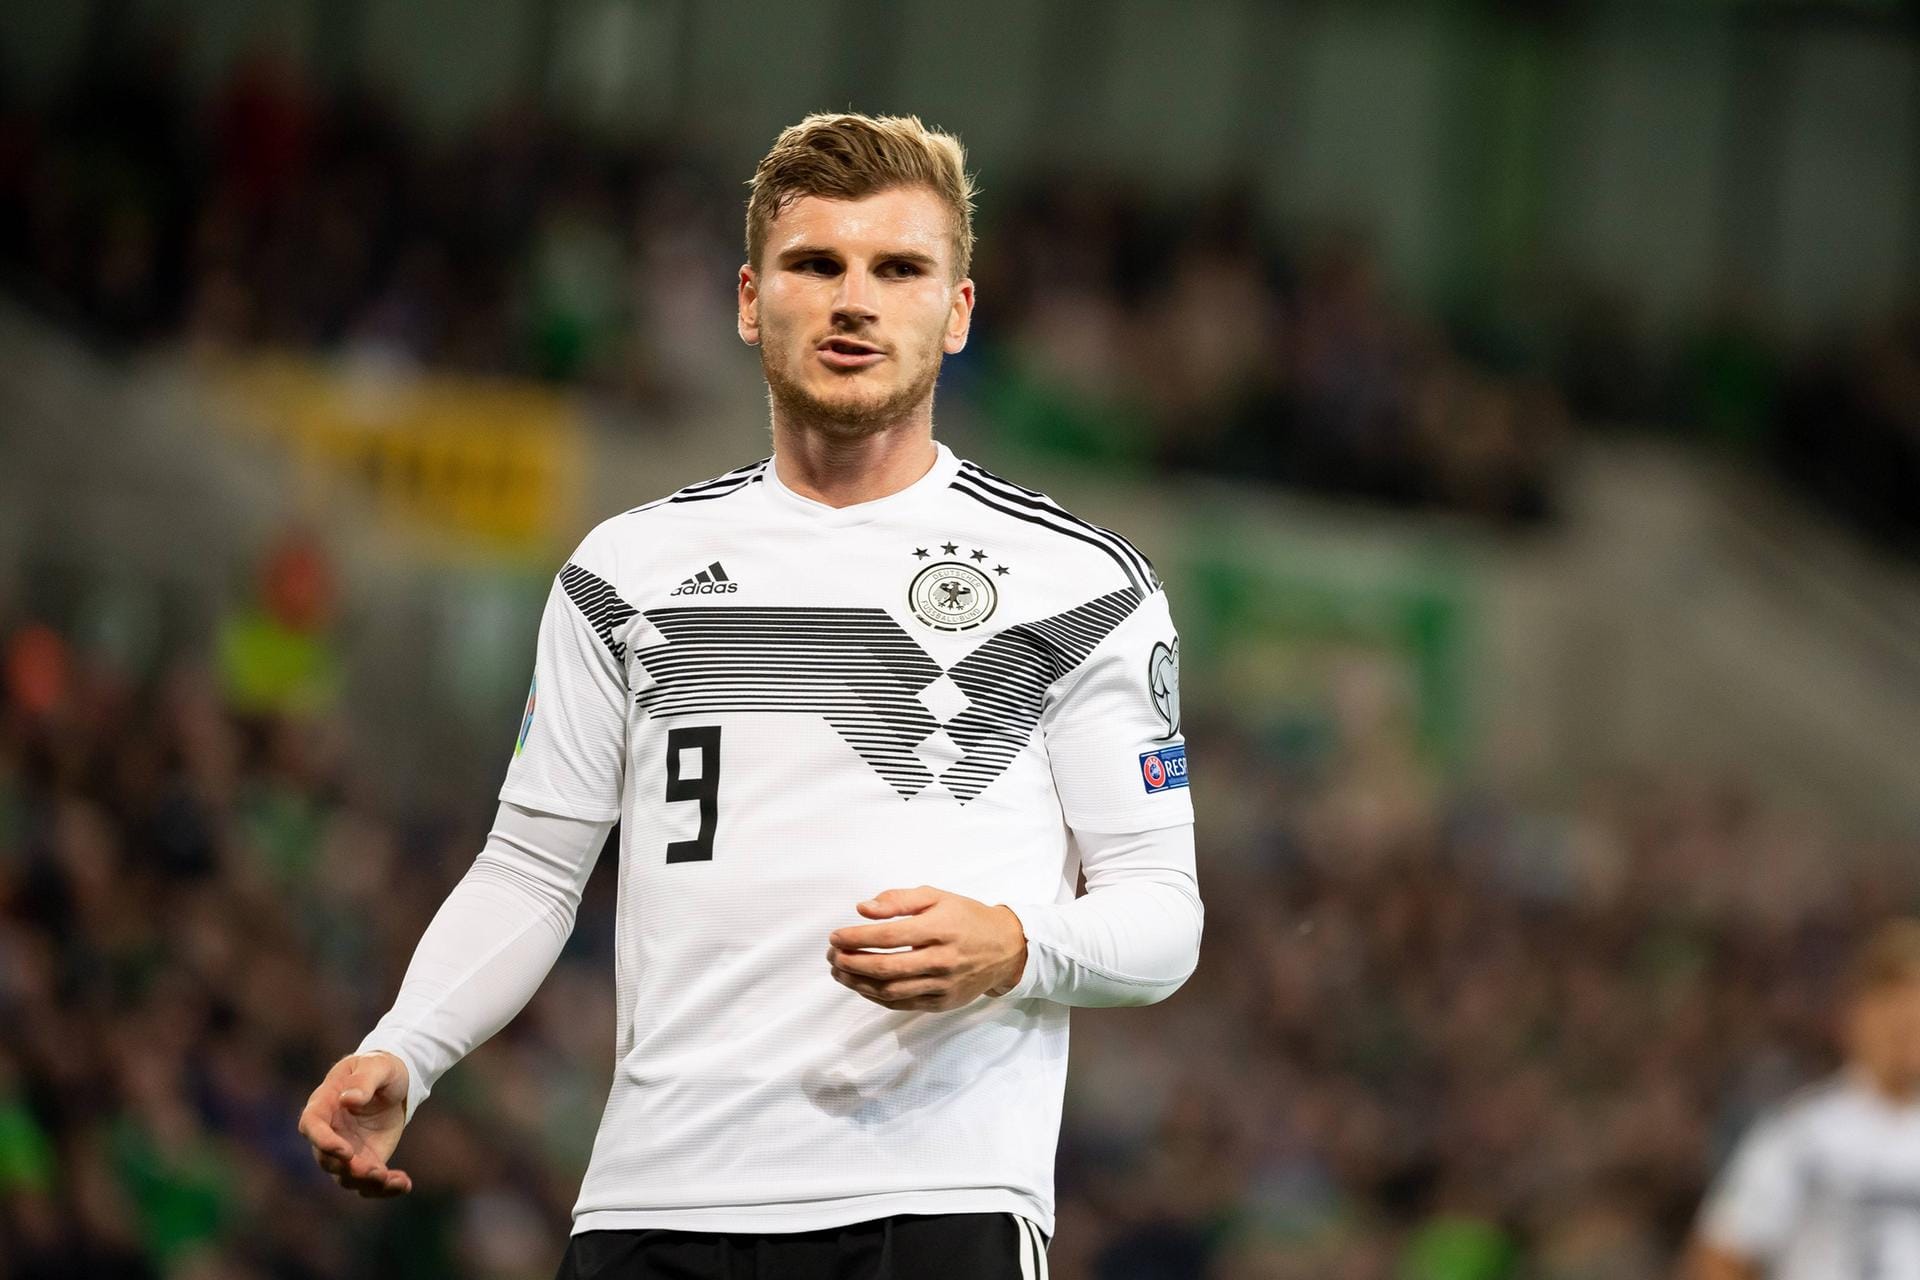 Angriff: Timo Werner (RB Leipzig).